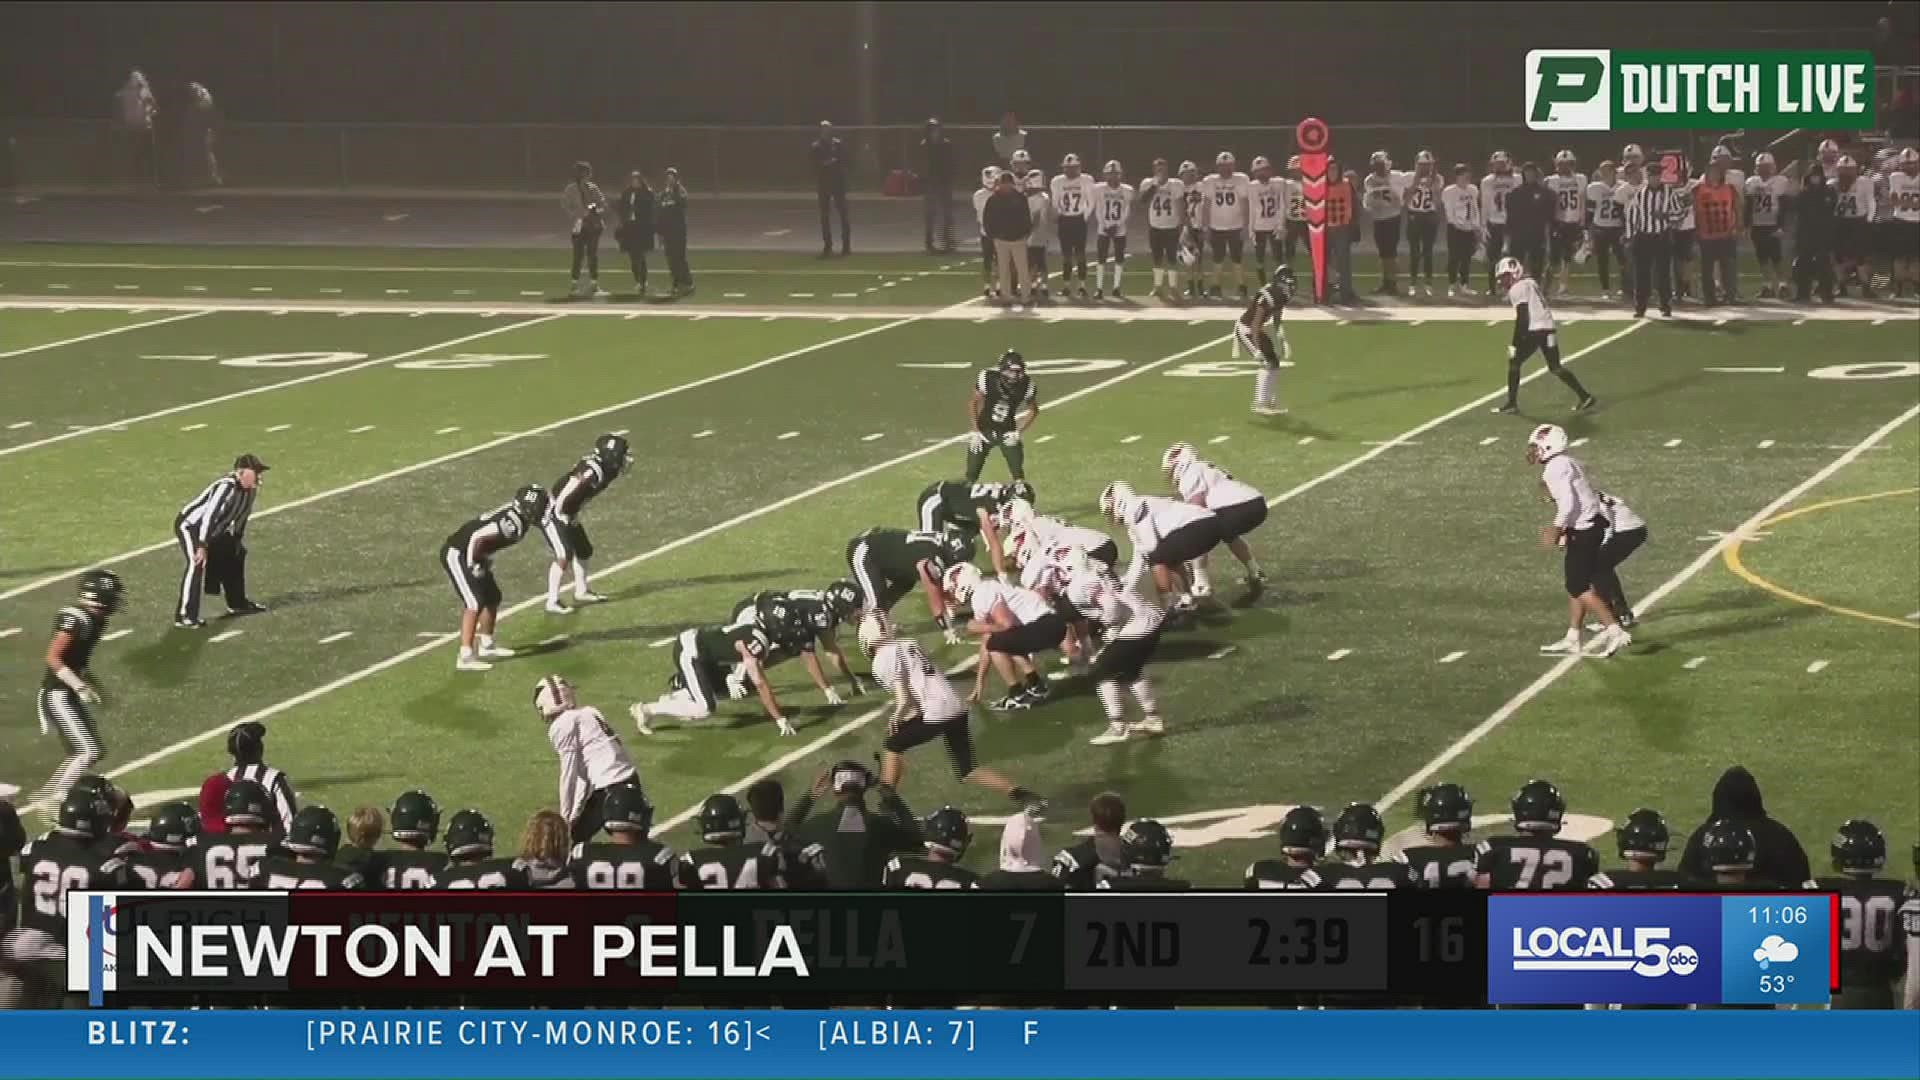 Newton moves to 5-0 on the season, defeating Pella 21-14. Plus, learn about the Pella Marching Band.